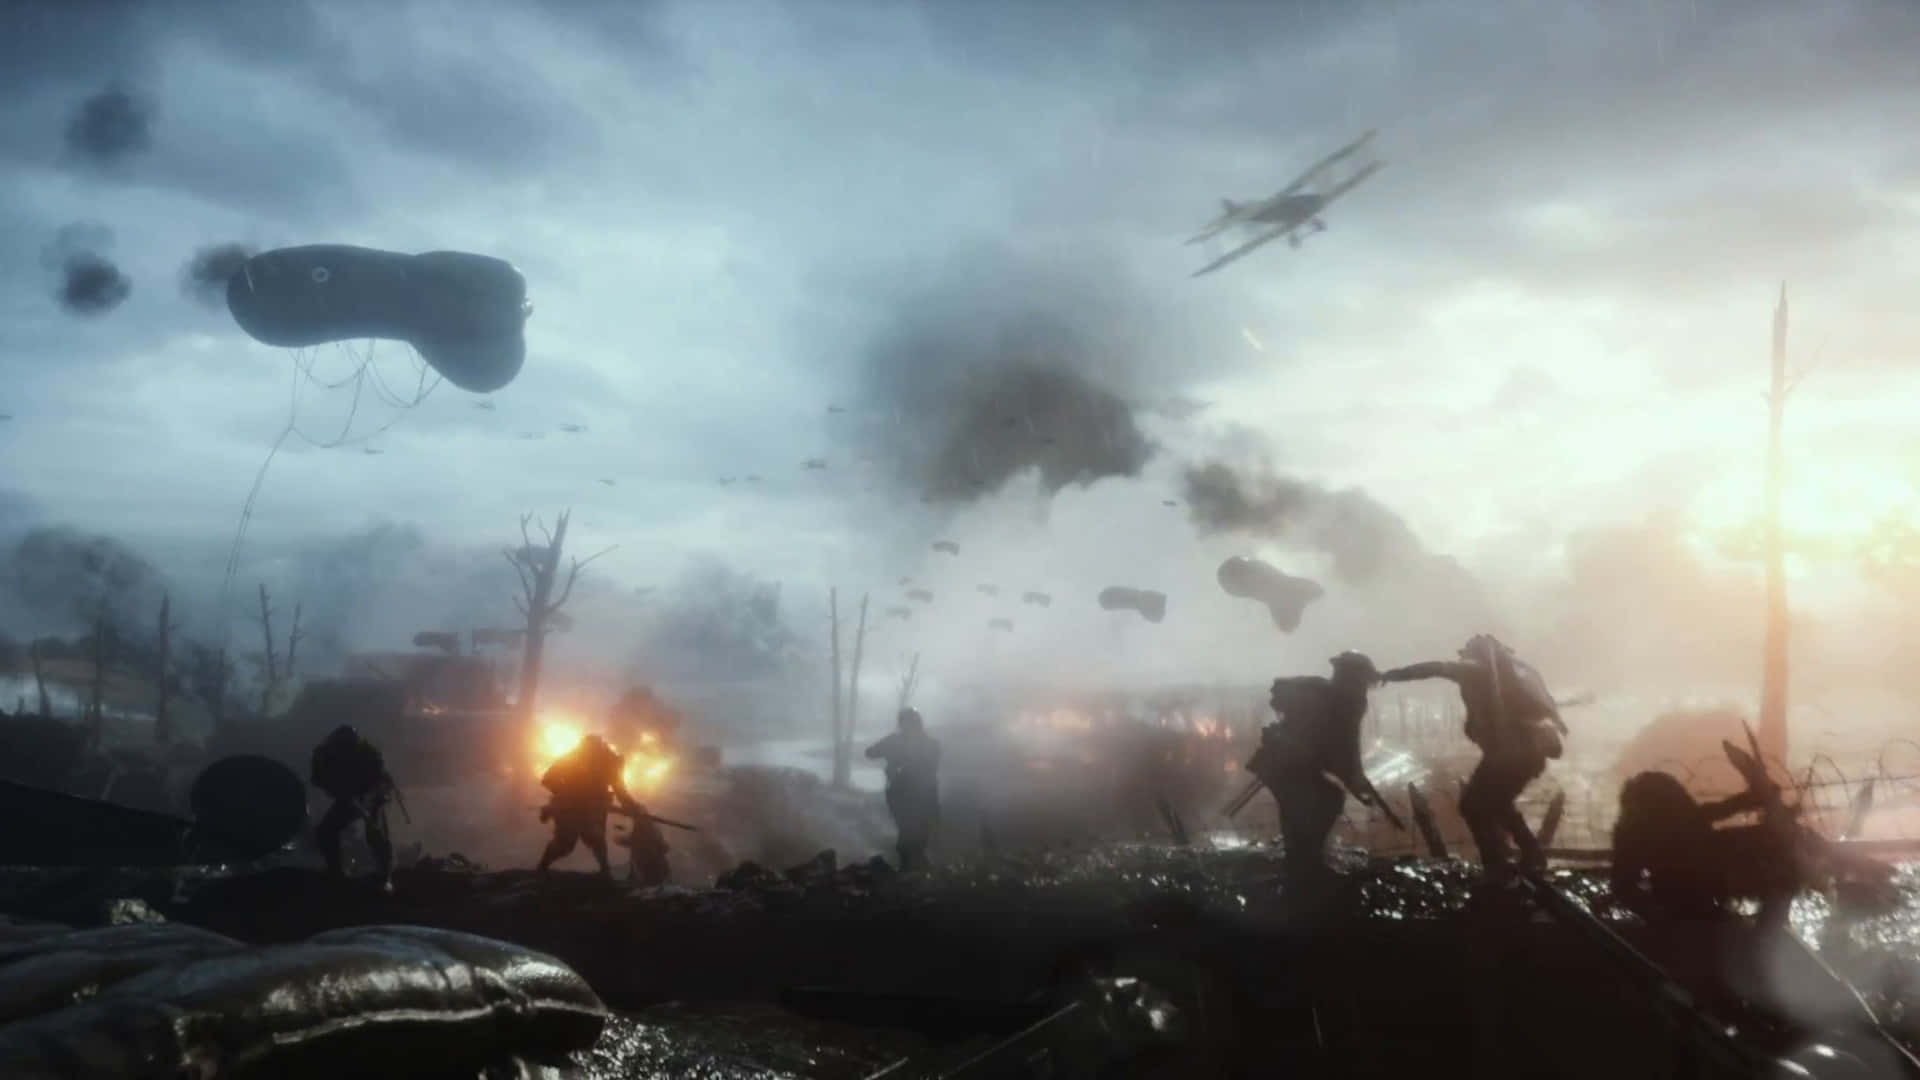 A Group Of Soldiers Are Fighting In The Sky